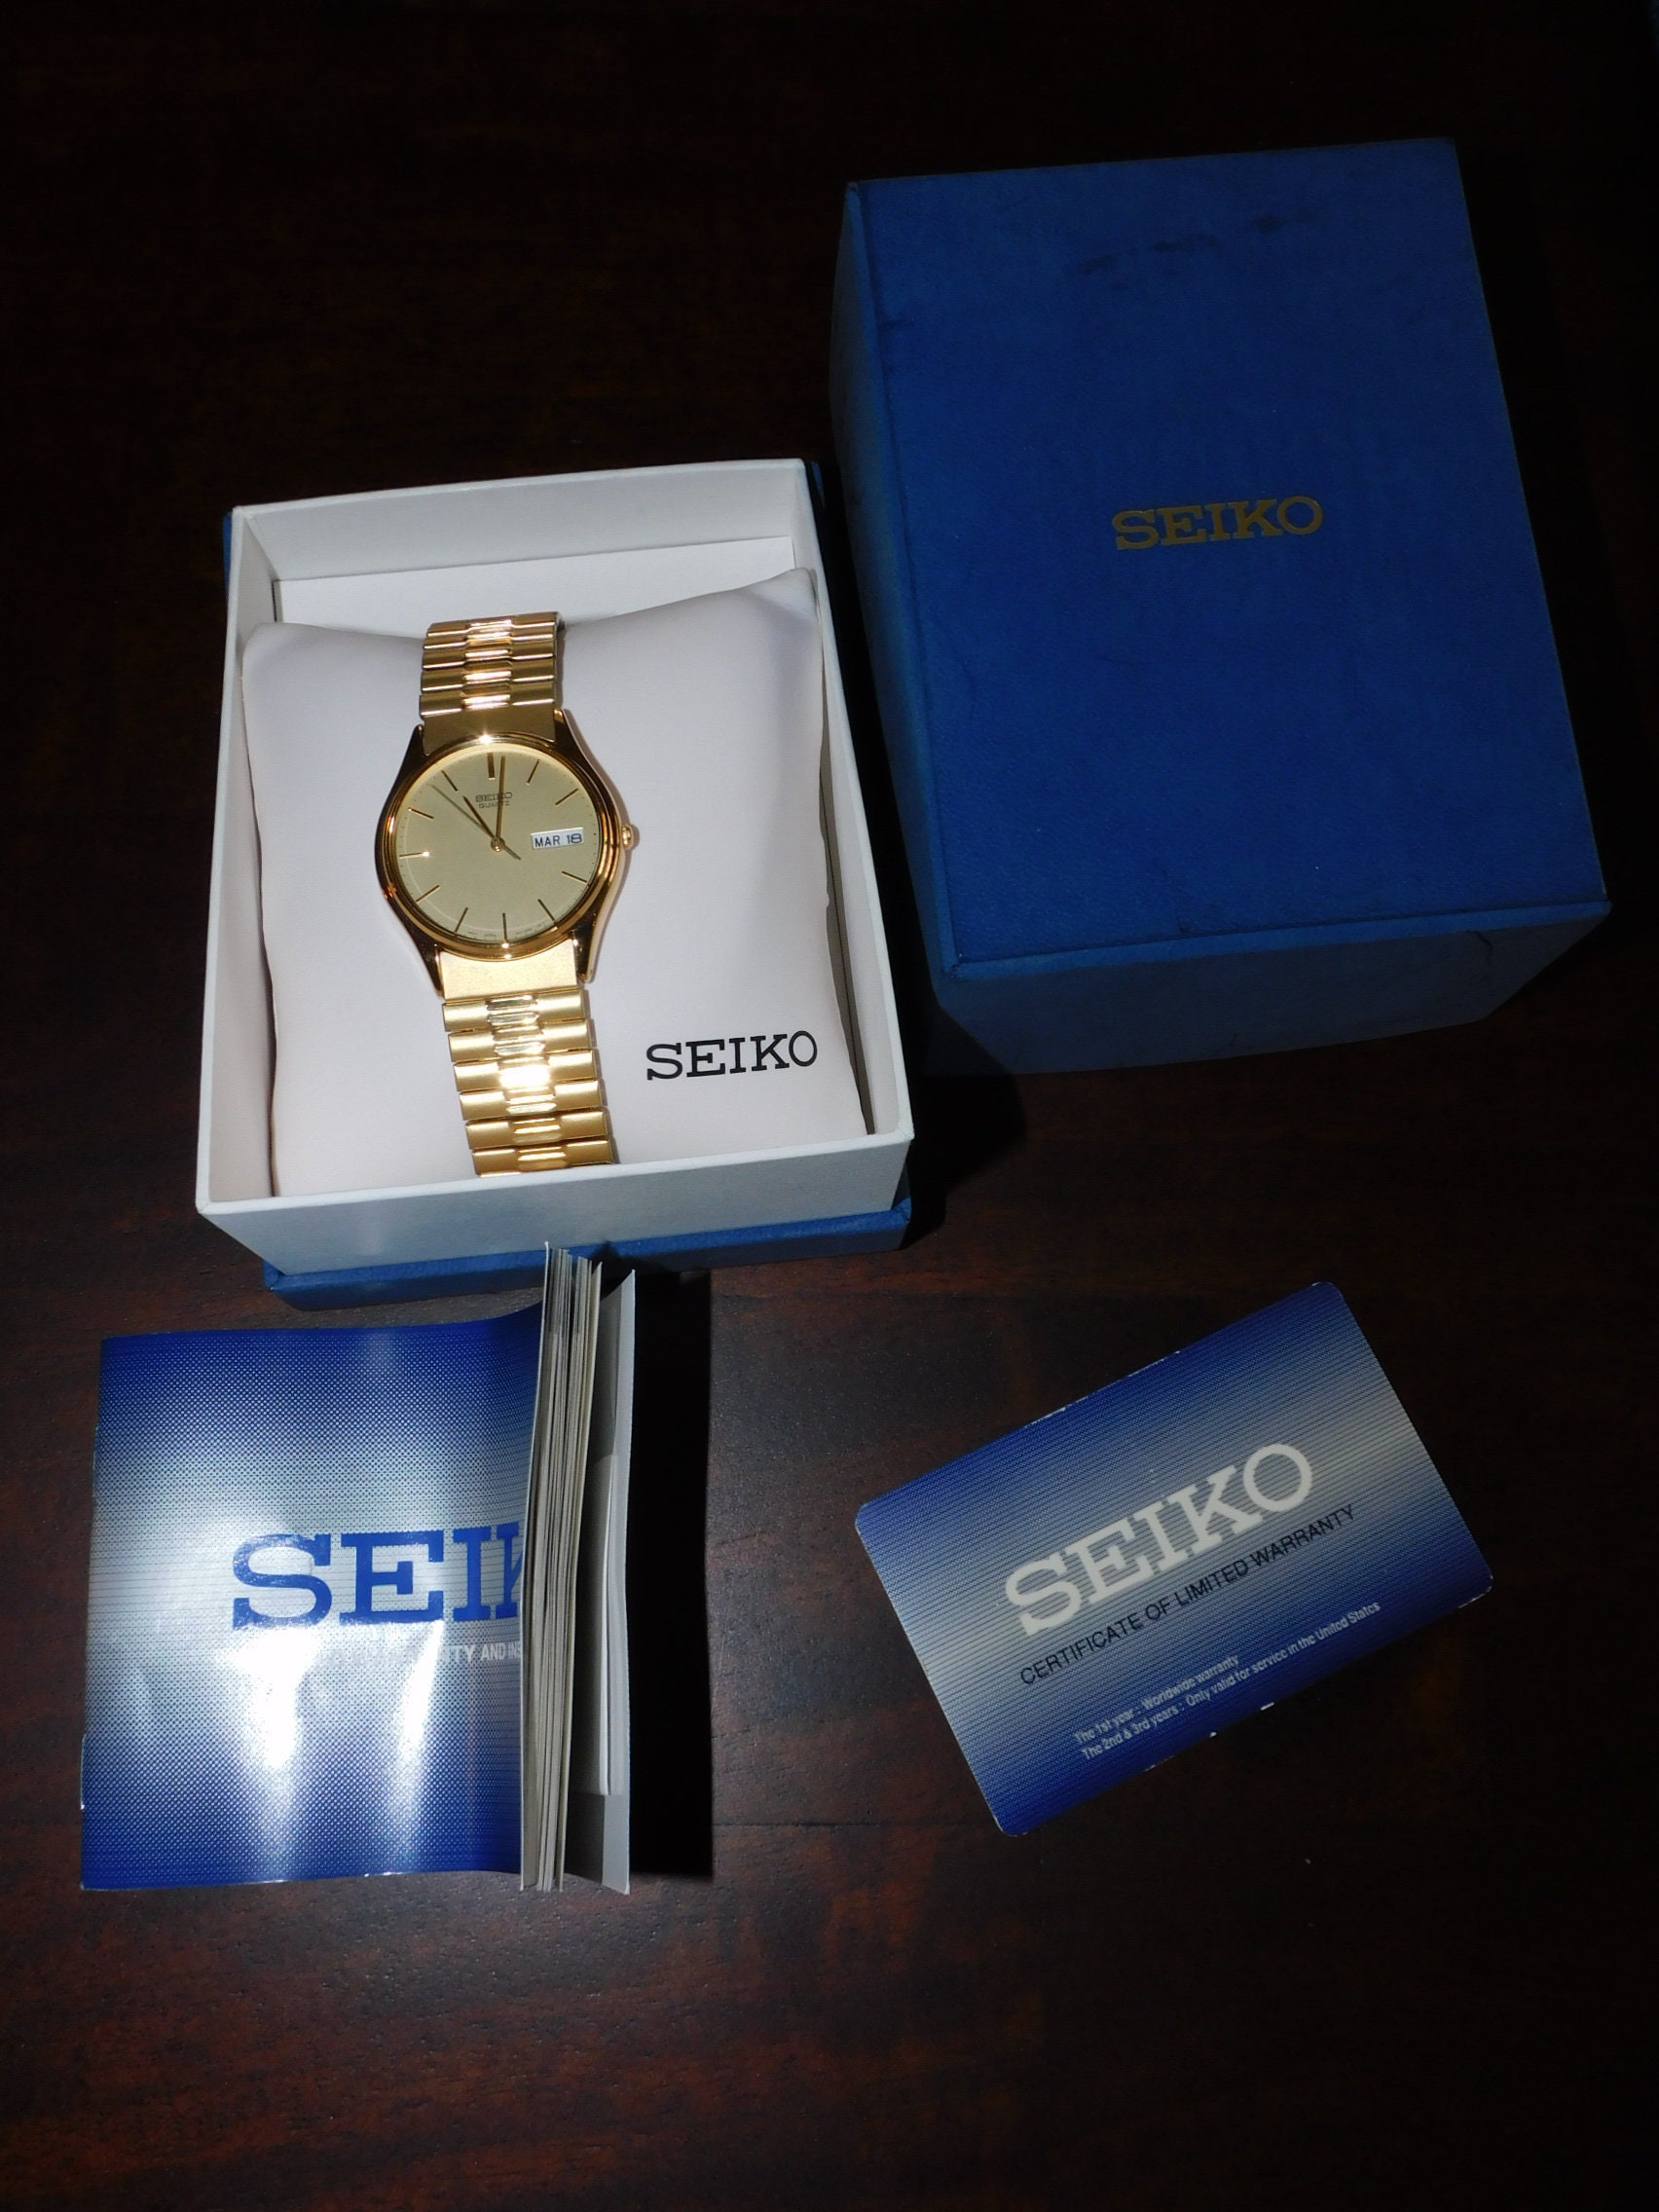 NEW 2003 Vintage Seiko 7N43-8A89 Mens Watch Gold Analog - Etsy